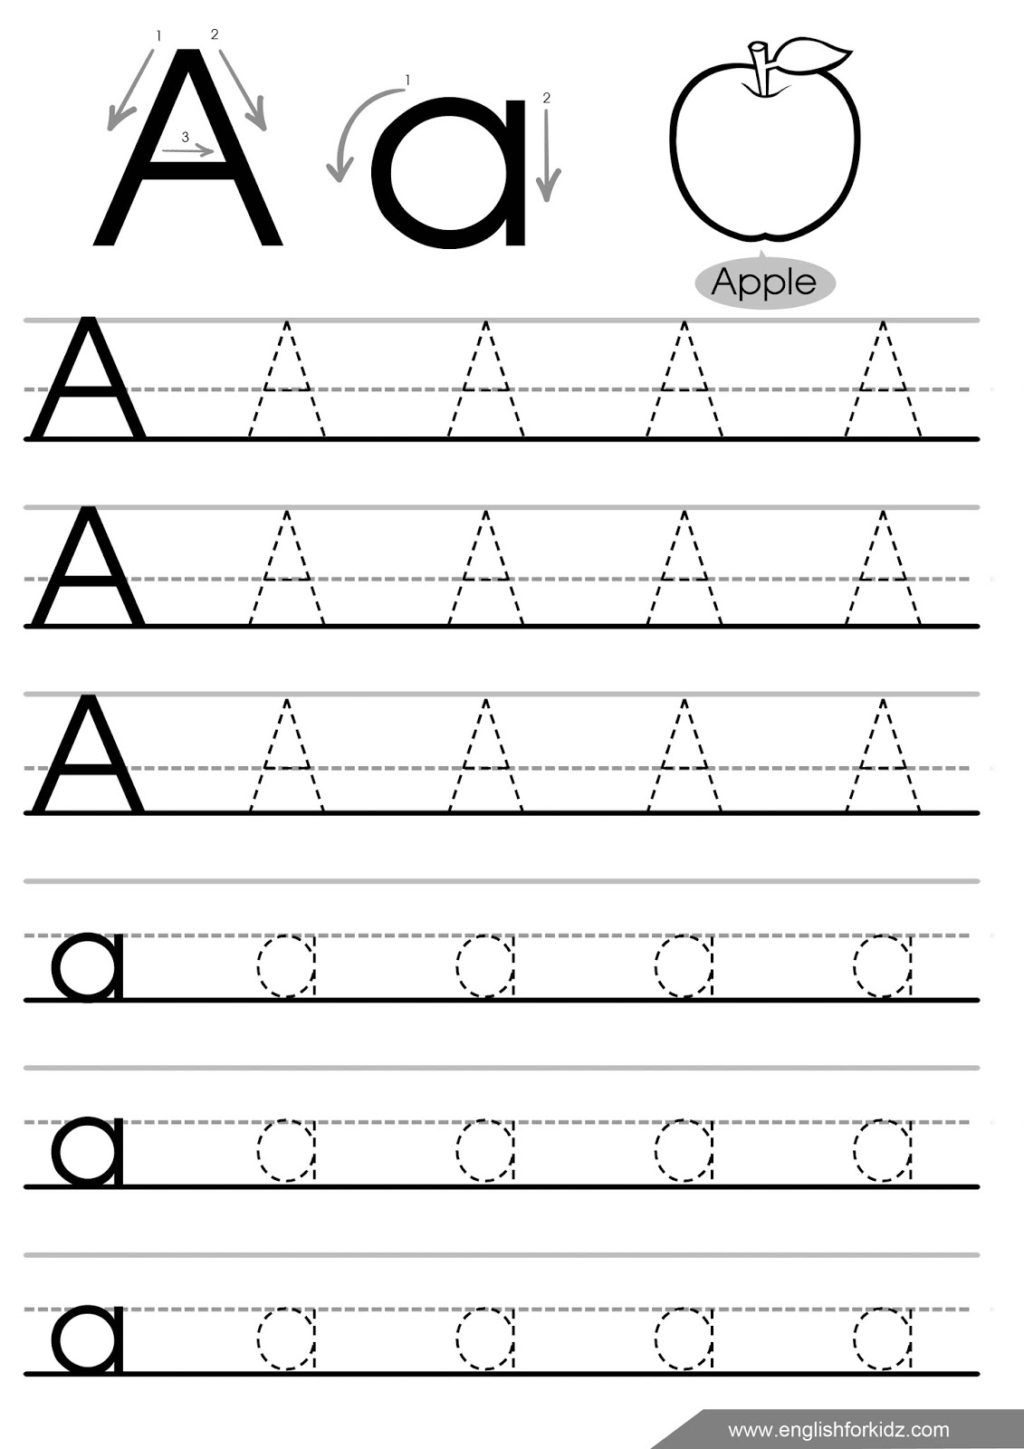 Worksheet ~ Incredible Tracing Sheets Image Ideas Letter pertaining to Name Letter Tracing Sheets